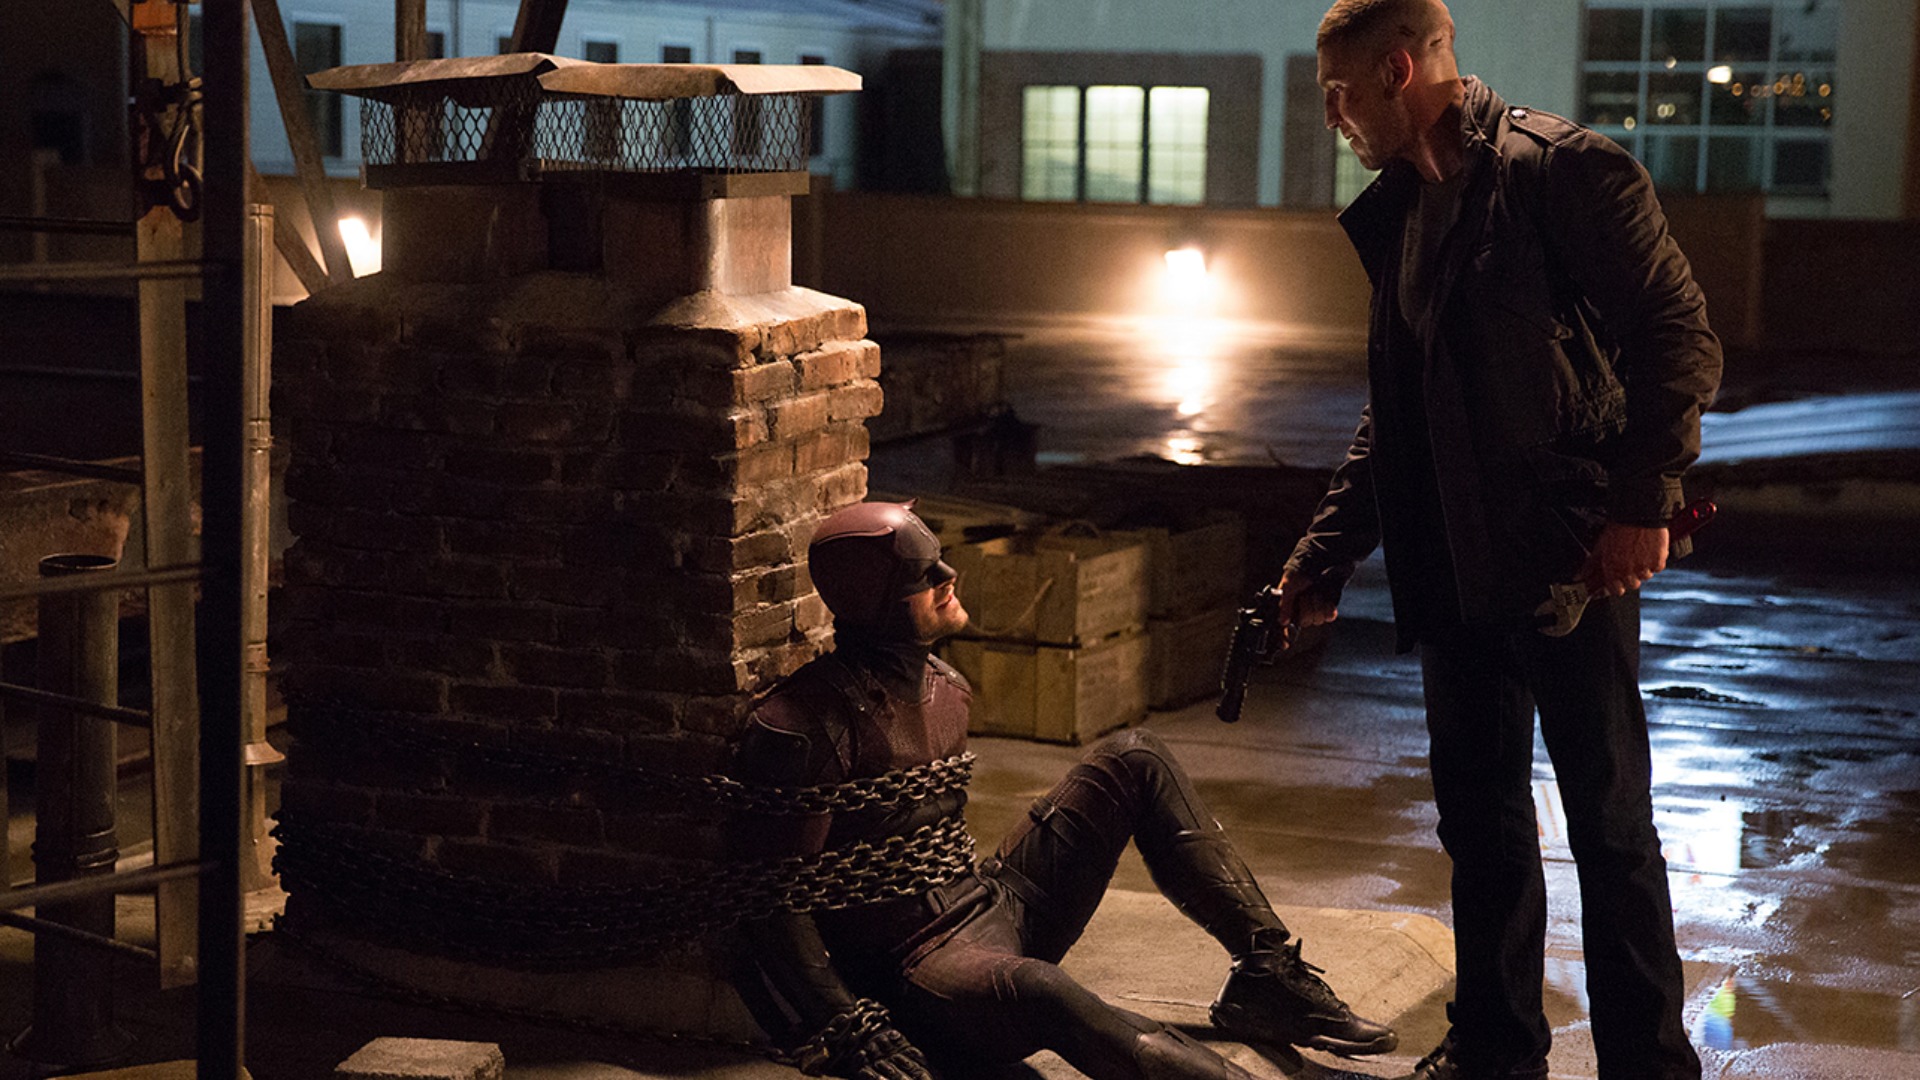 Released production still of Daredevil and Punisher in their rooftop scene